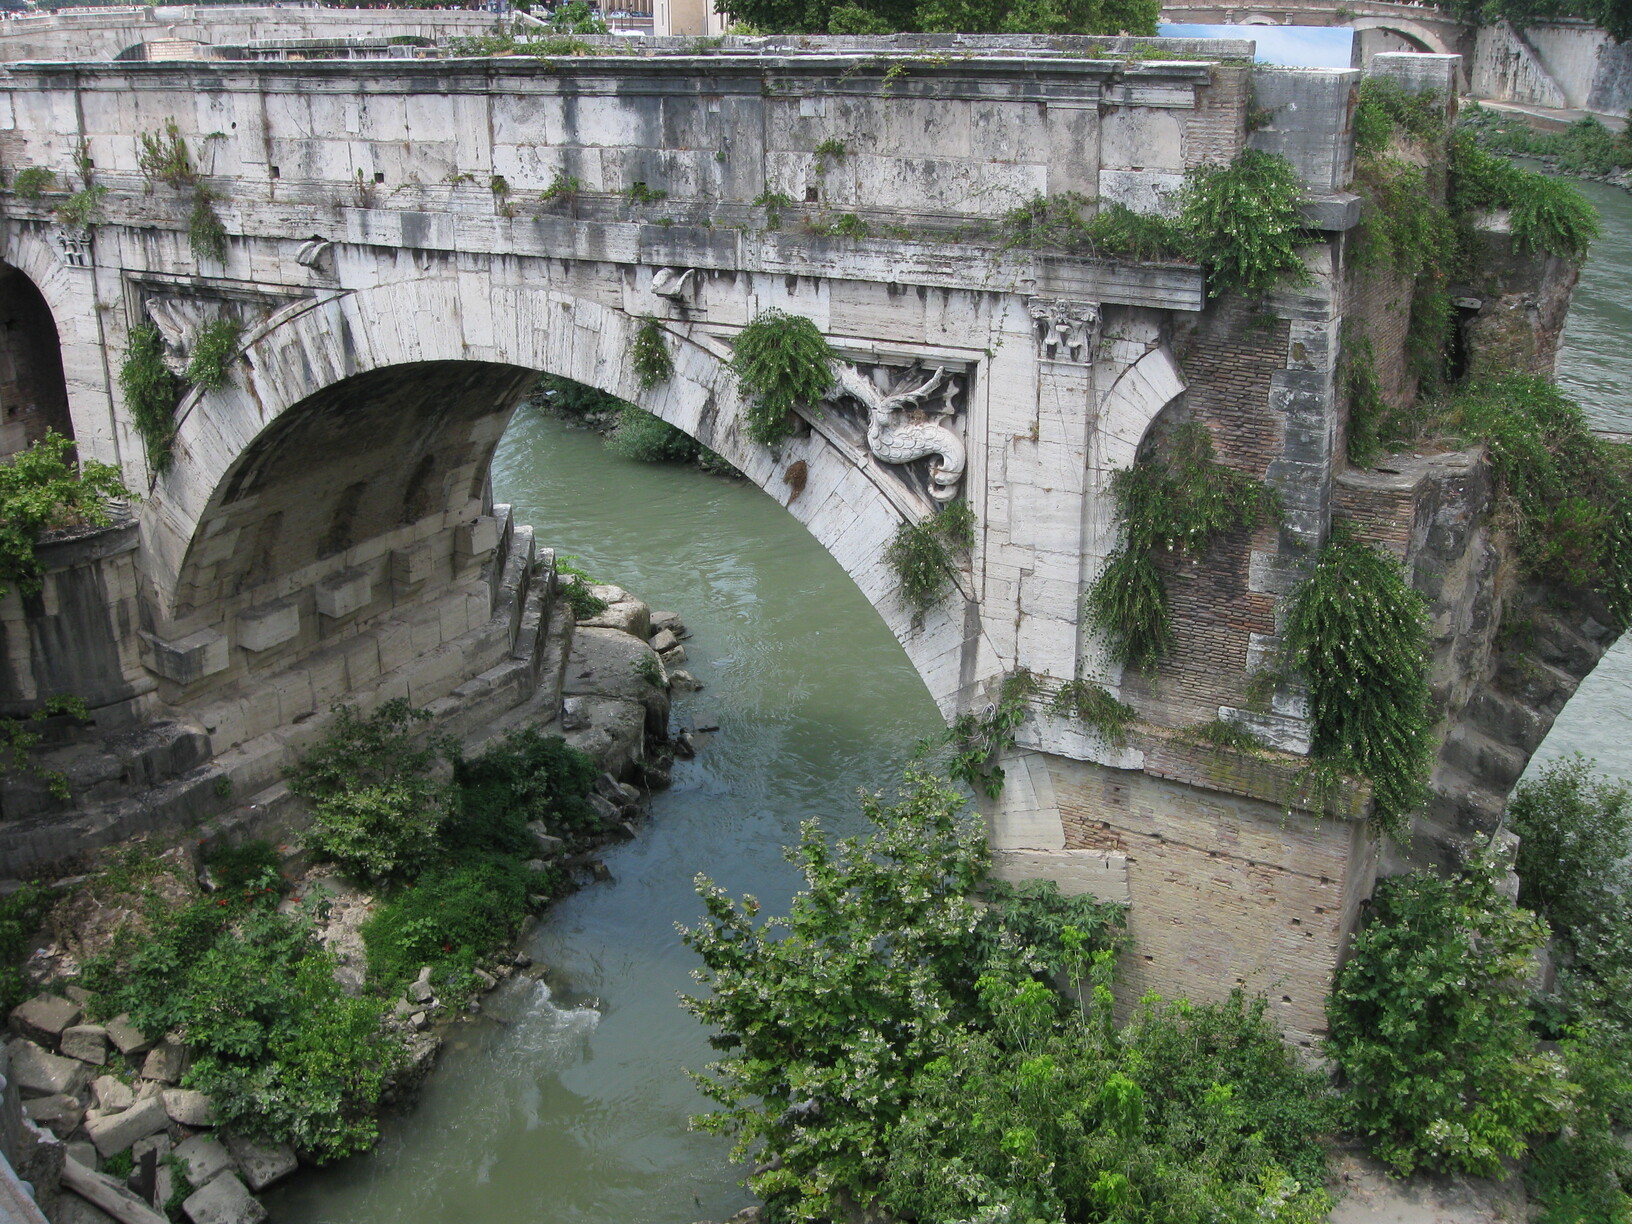 Ancient bridge section over Tiber River, Rome, Italy